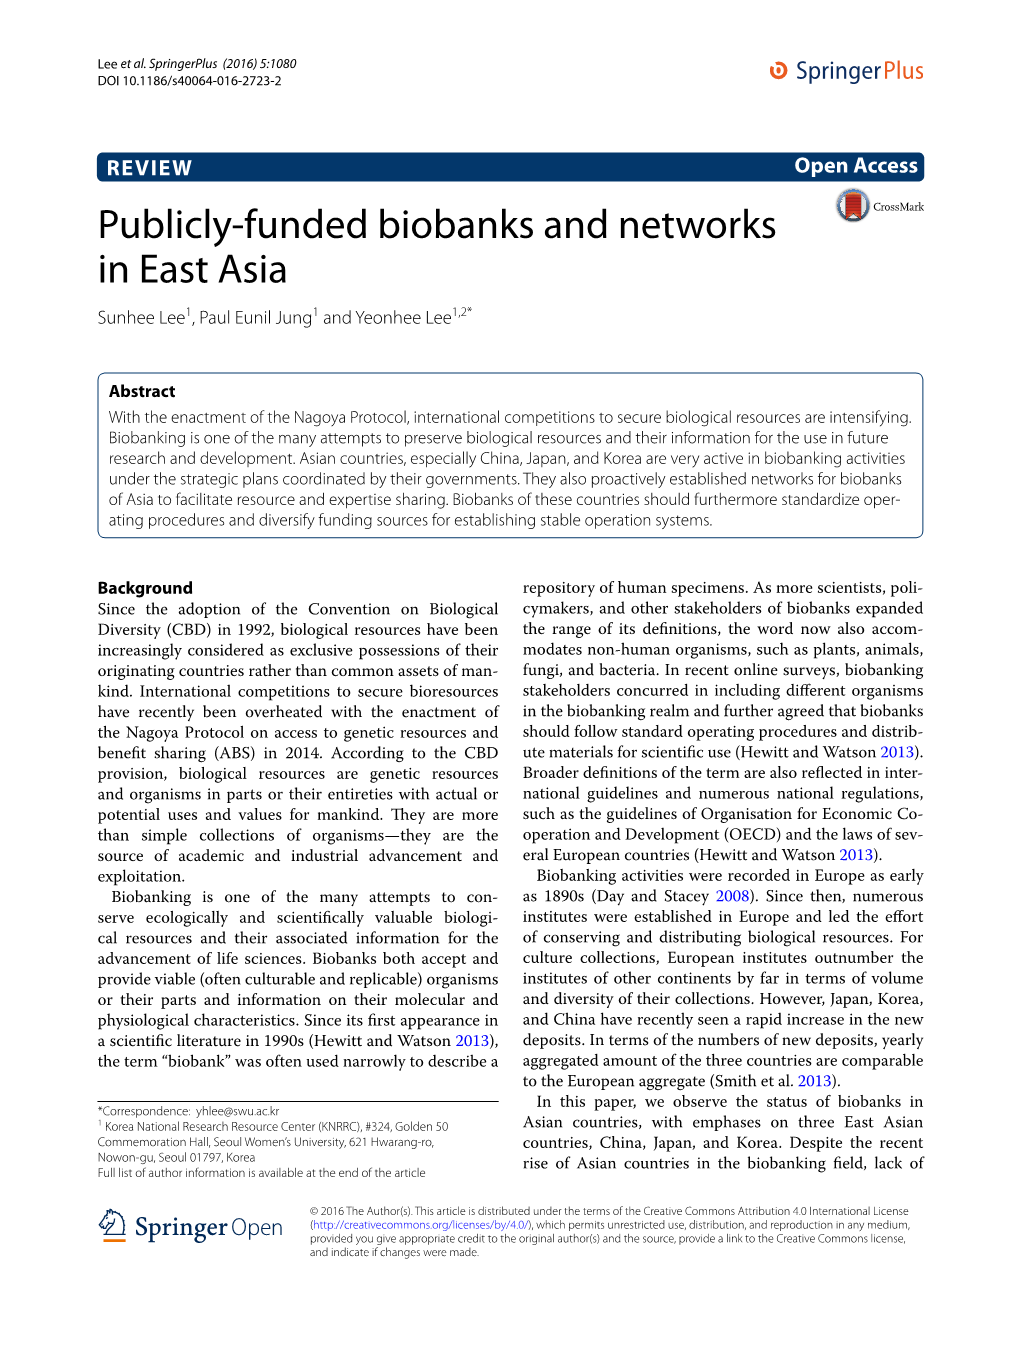 Publicly-Funded Biobanks and Networks in East Asia